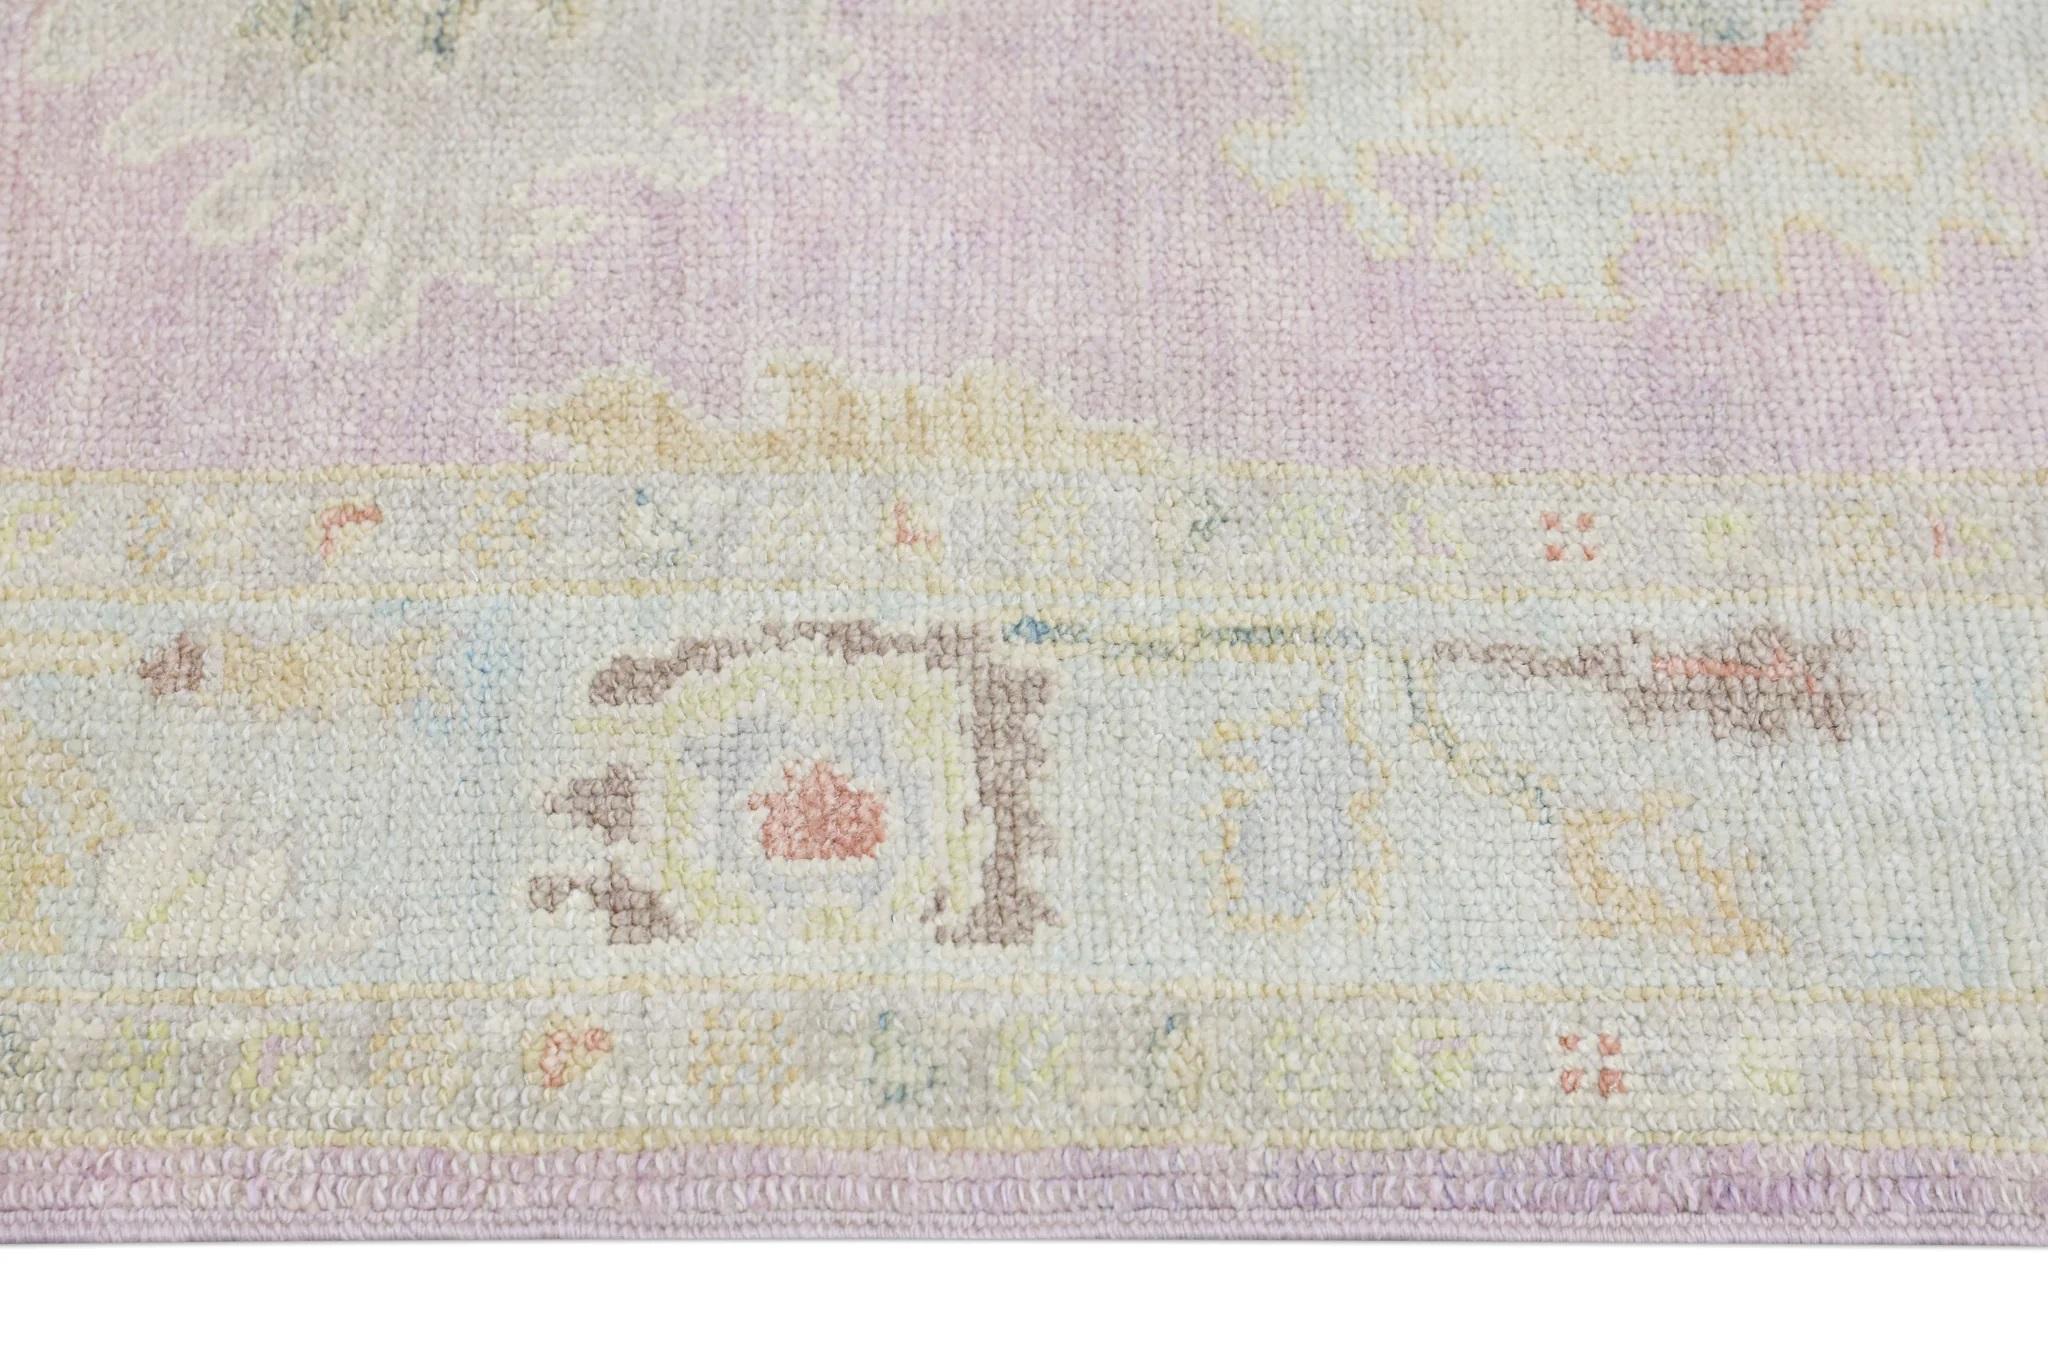 Pink Handwoven Wool Turkish Oushak Rug with Floral Design 3'1